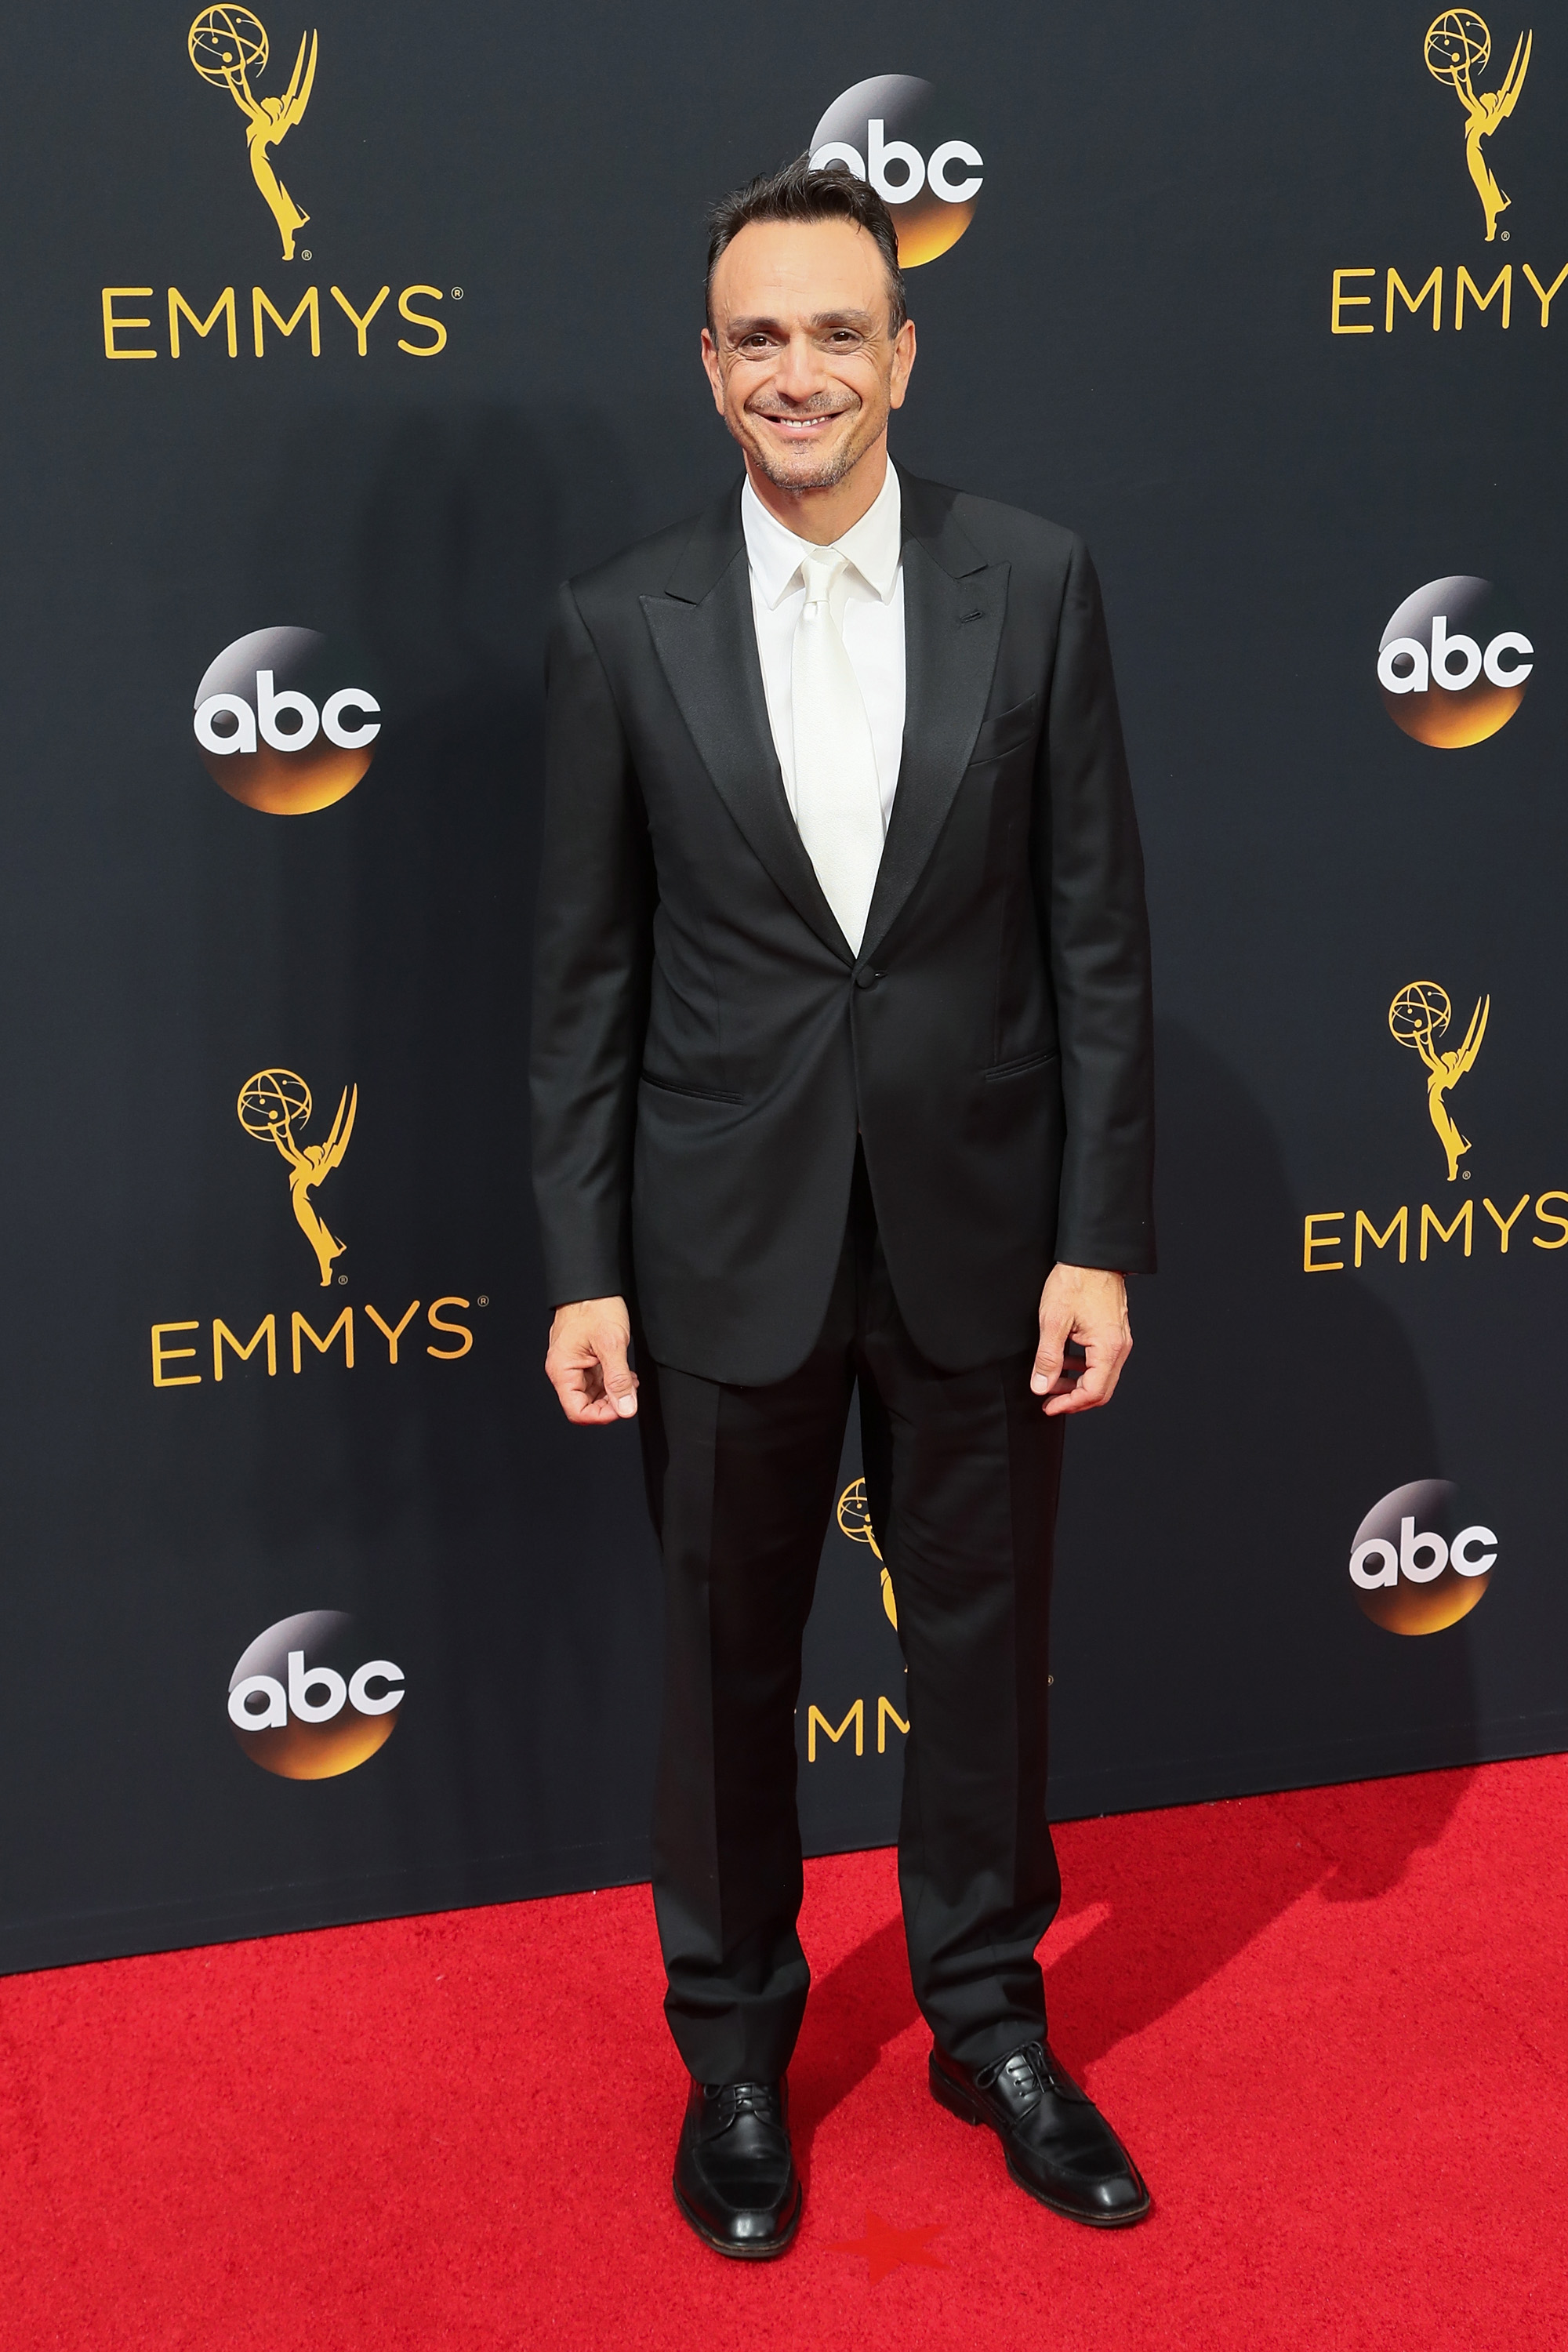 Hank Azaria arrives at the 68th Annual Primetime Emmy Awards at Microsoft Theater on September 18, 2016 in Los Angeles.